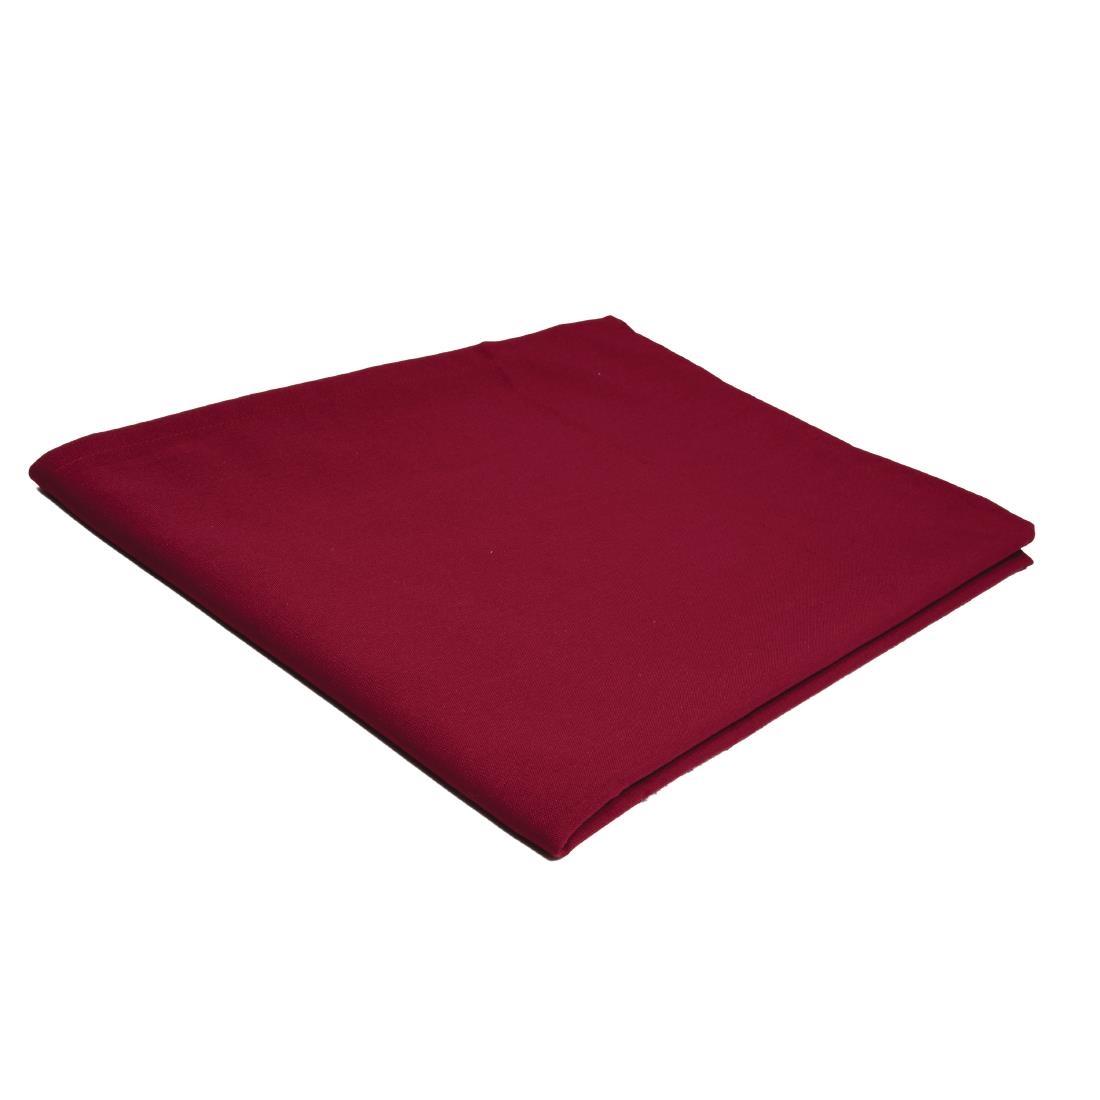 Occasions Tablecloth Burgundy 1780 x 2750mm - HB569  - 3